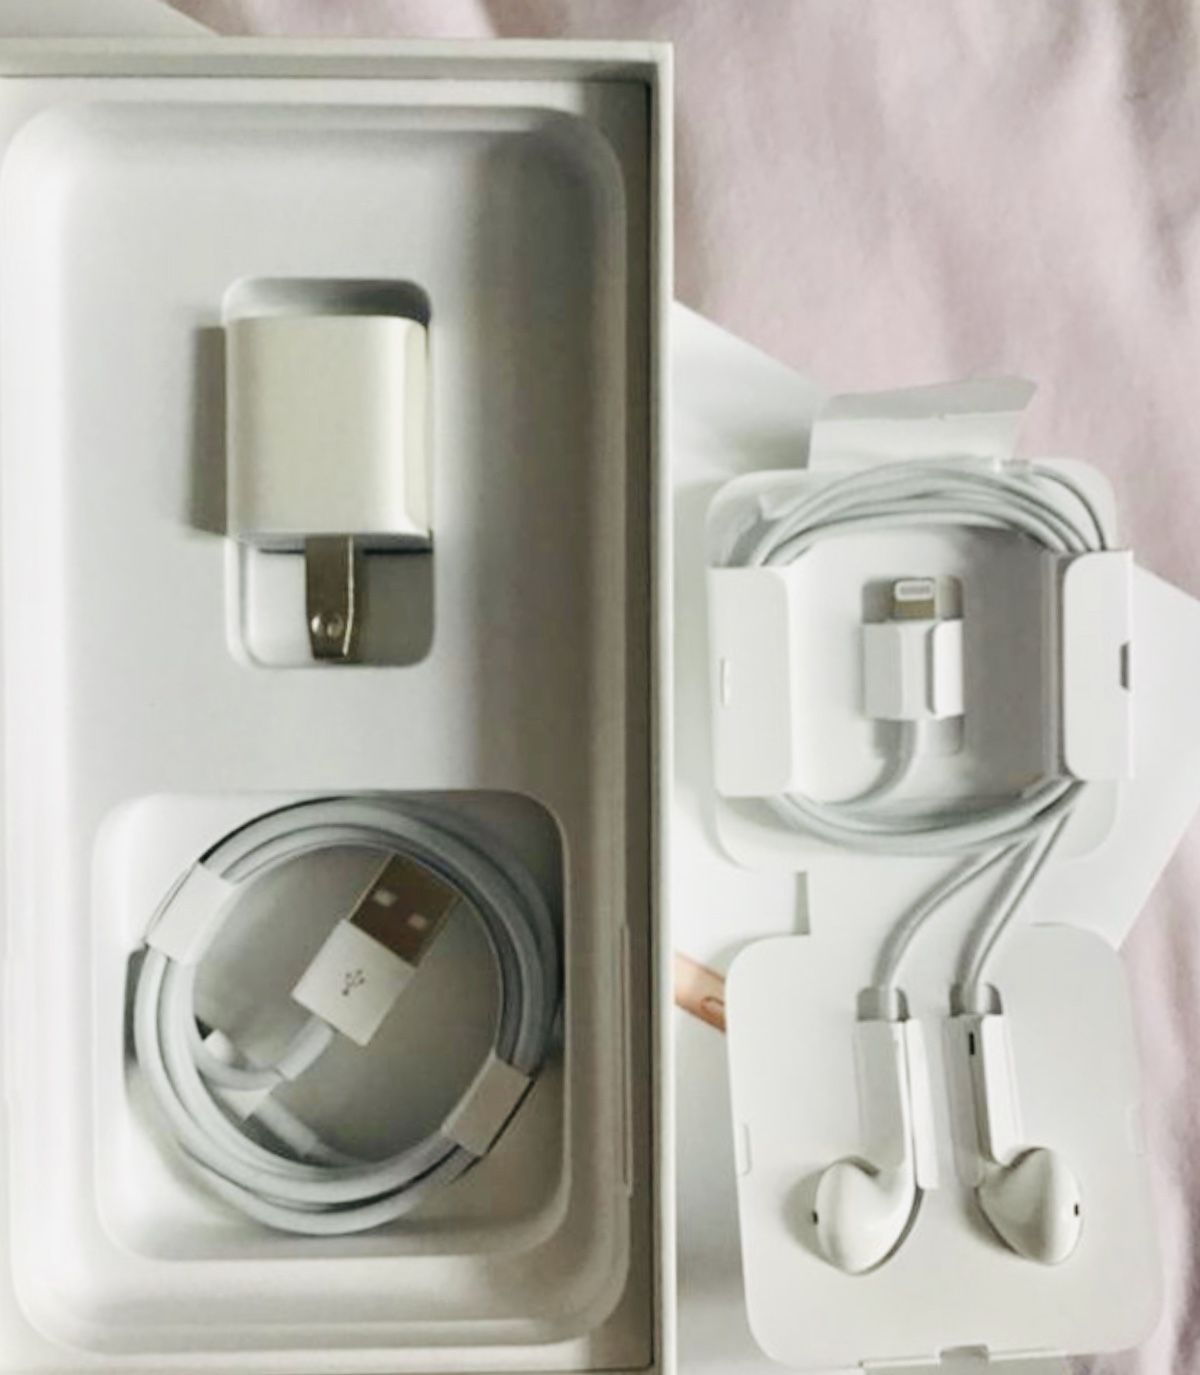 Apple Headphones + USB + Charger for IPhone